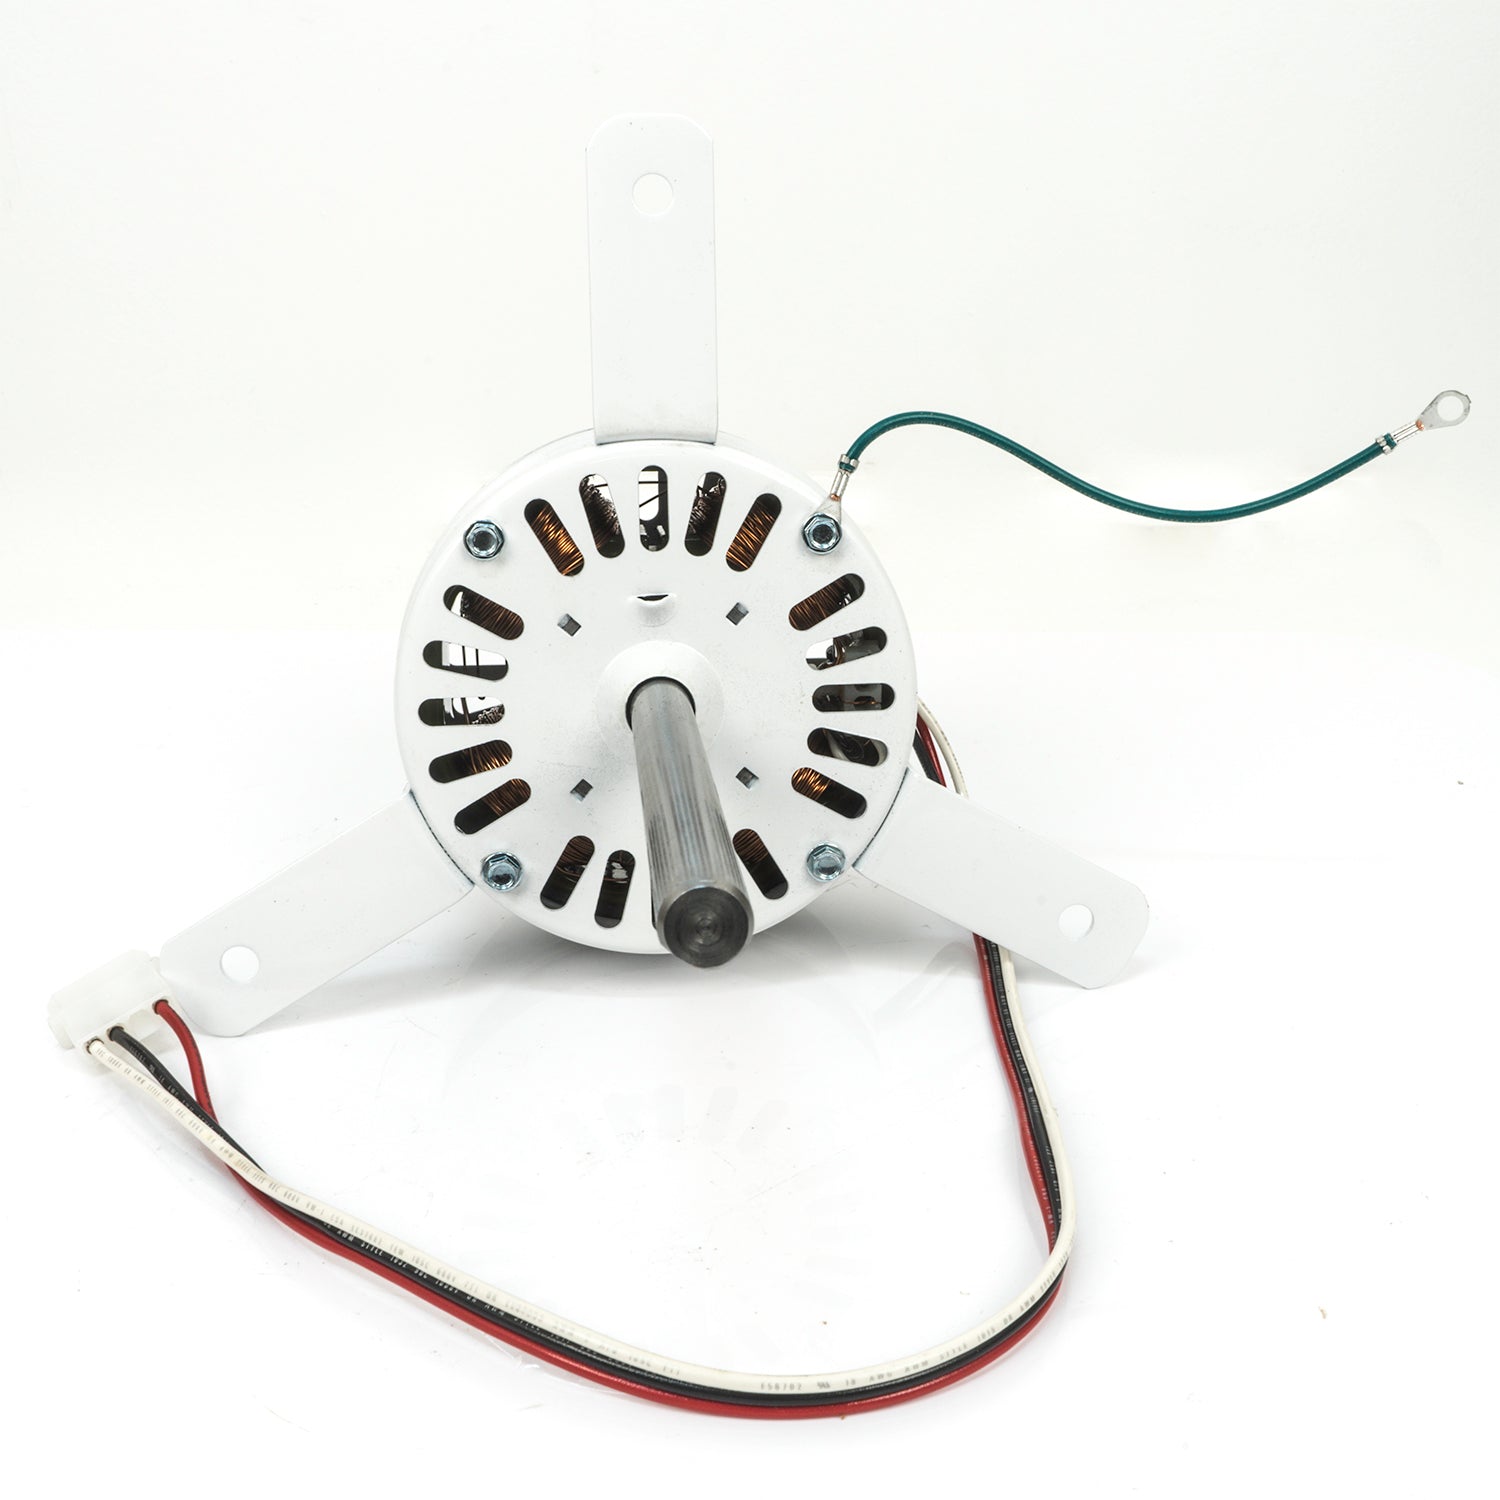 Packard 90620, HVAC/R Motors, OEM Replacement, Shaded Pole.